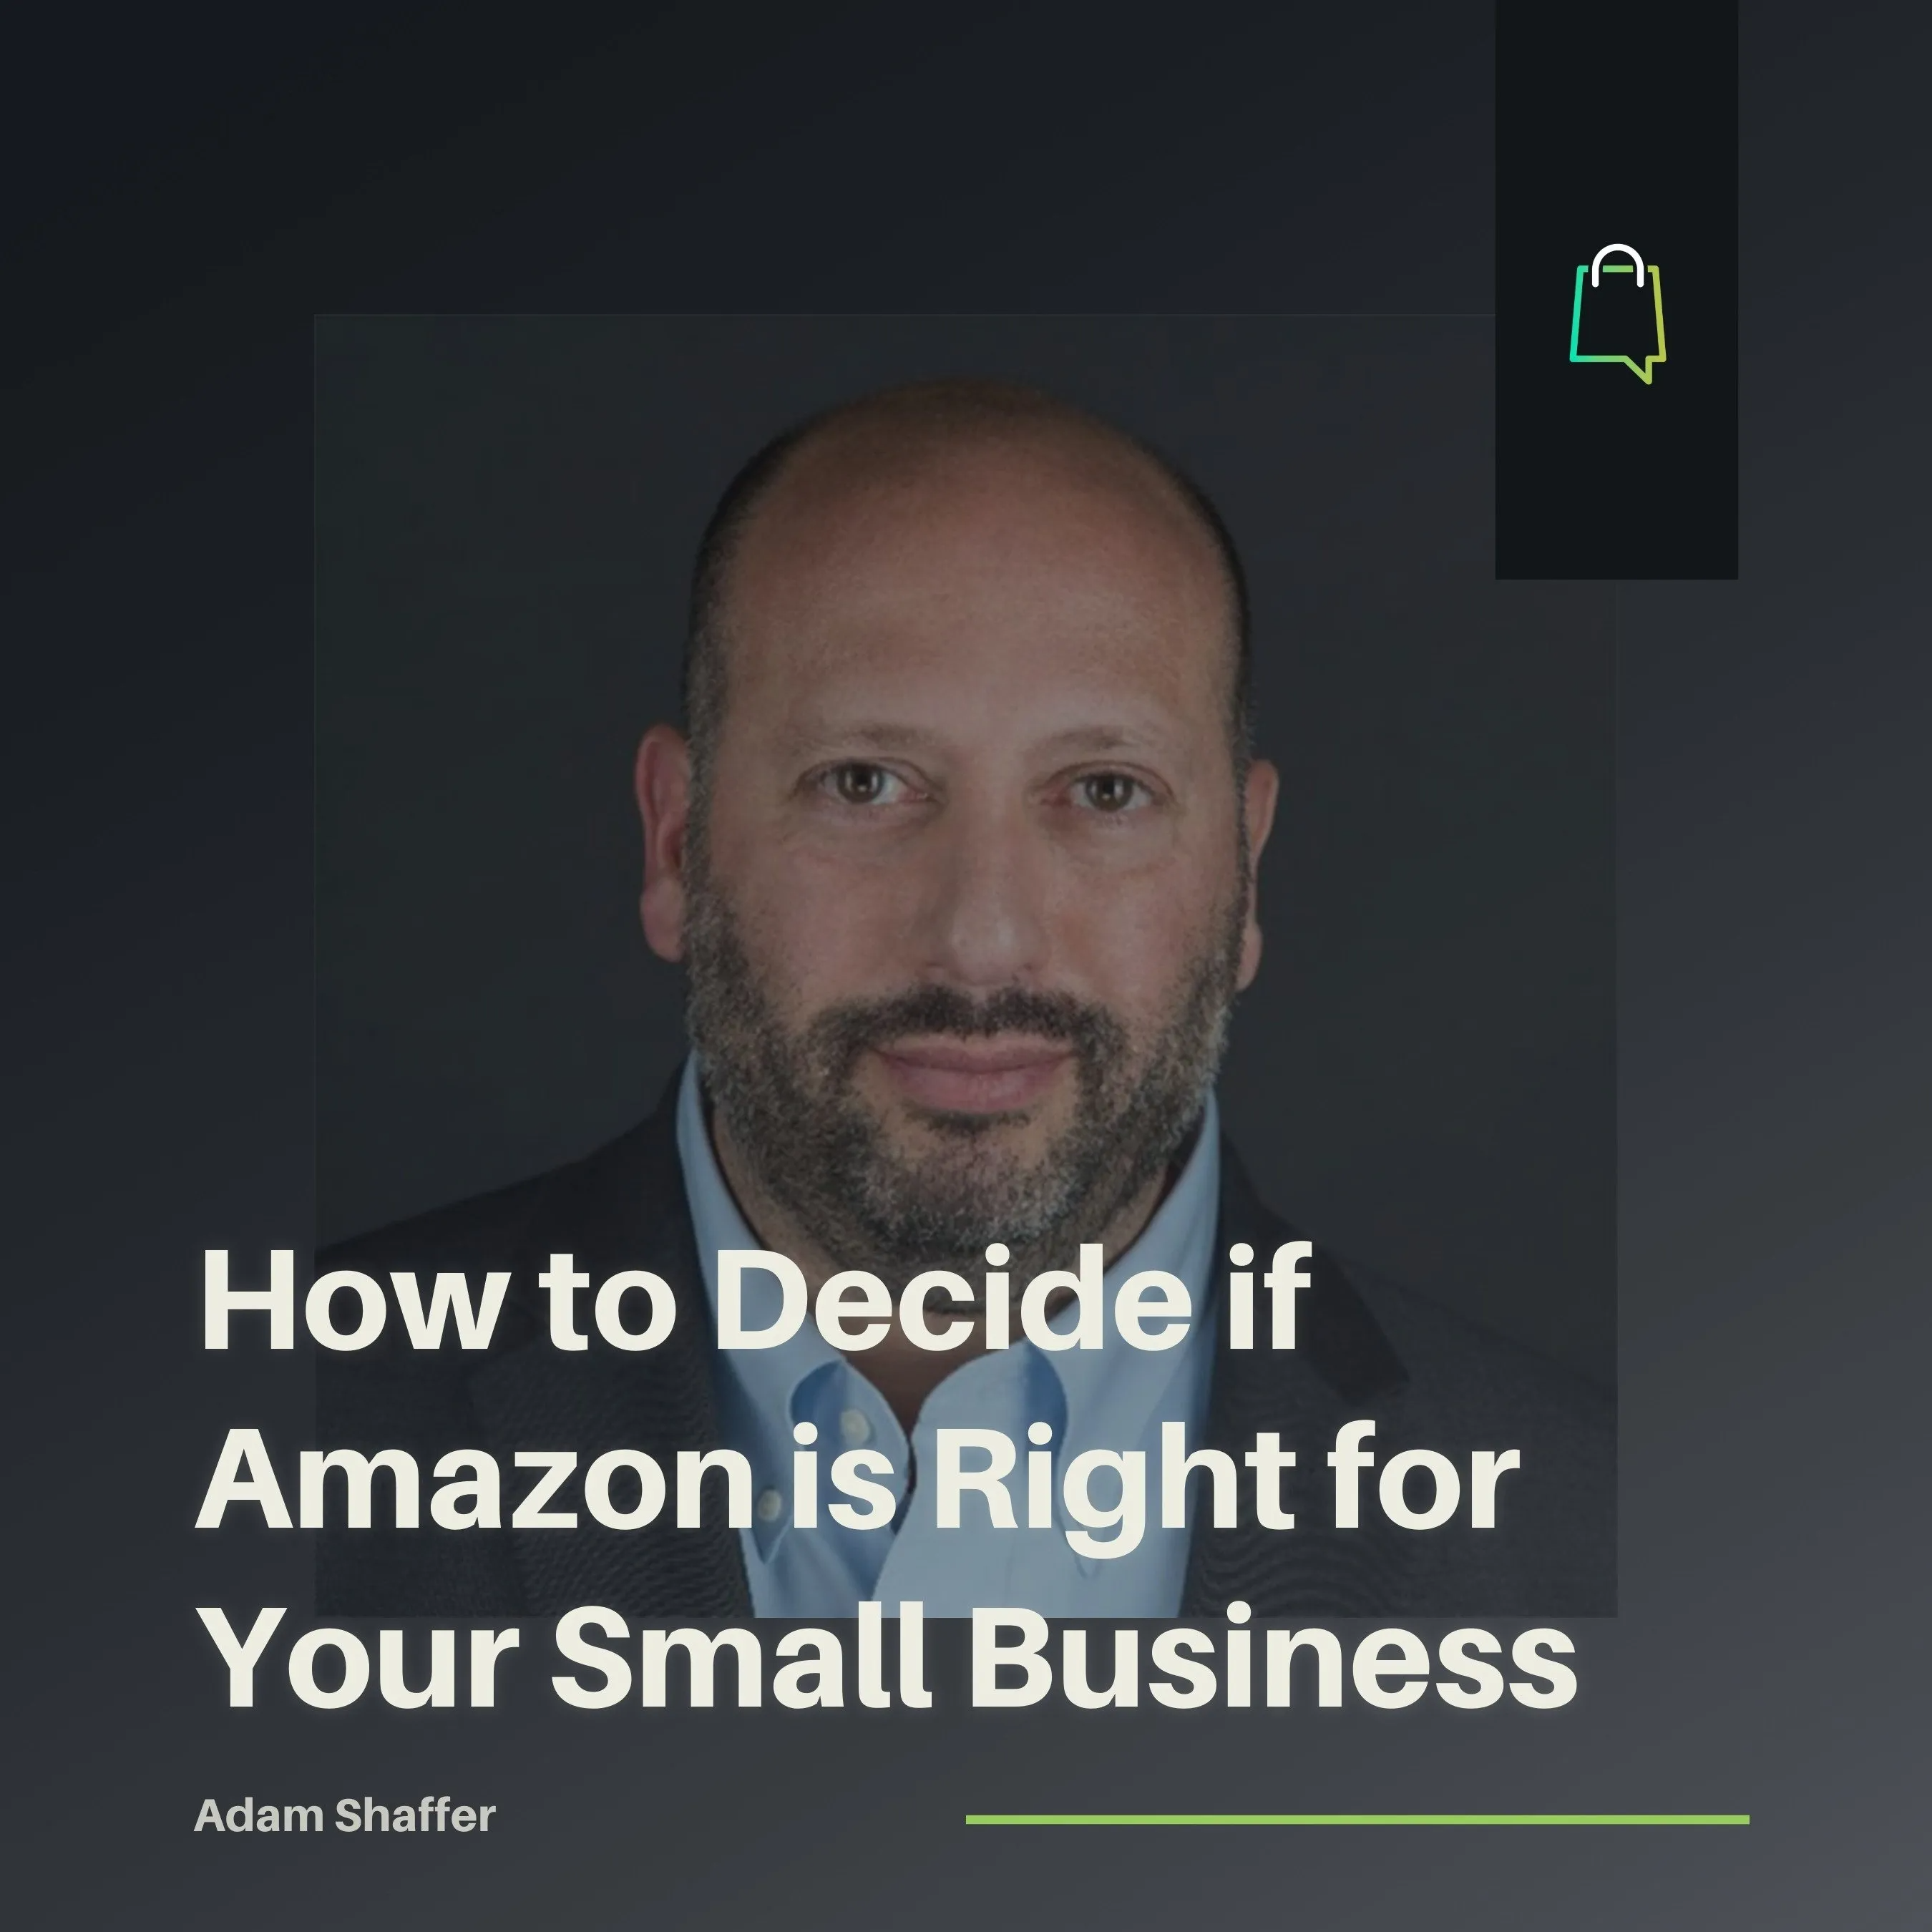 How to Decide if Amazon is Right for Your Small Business